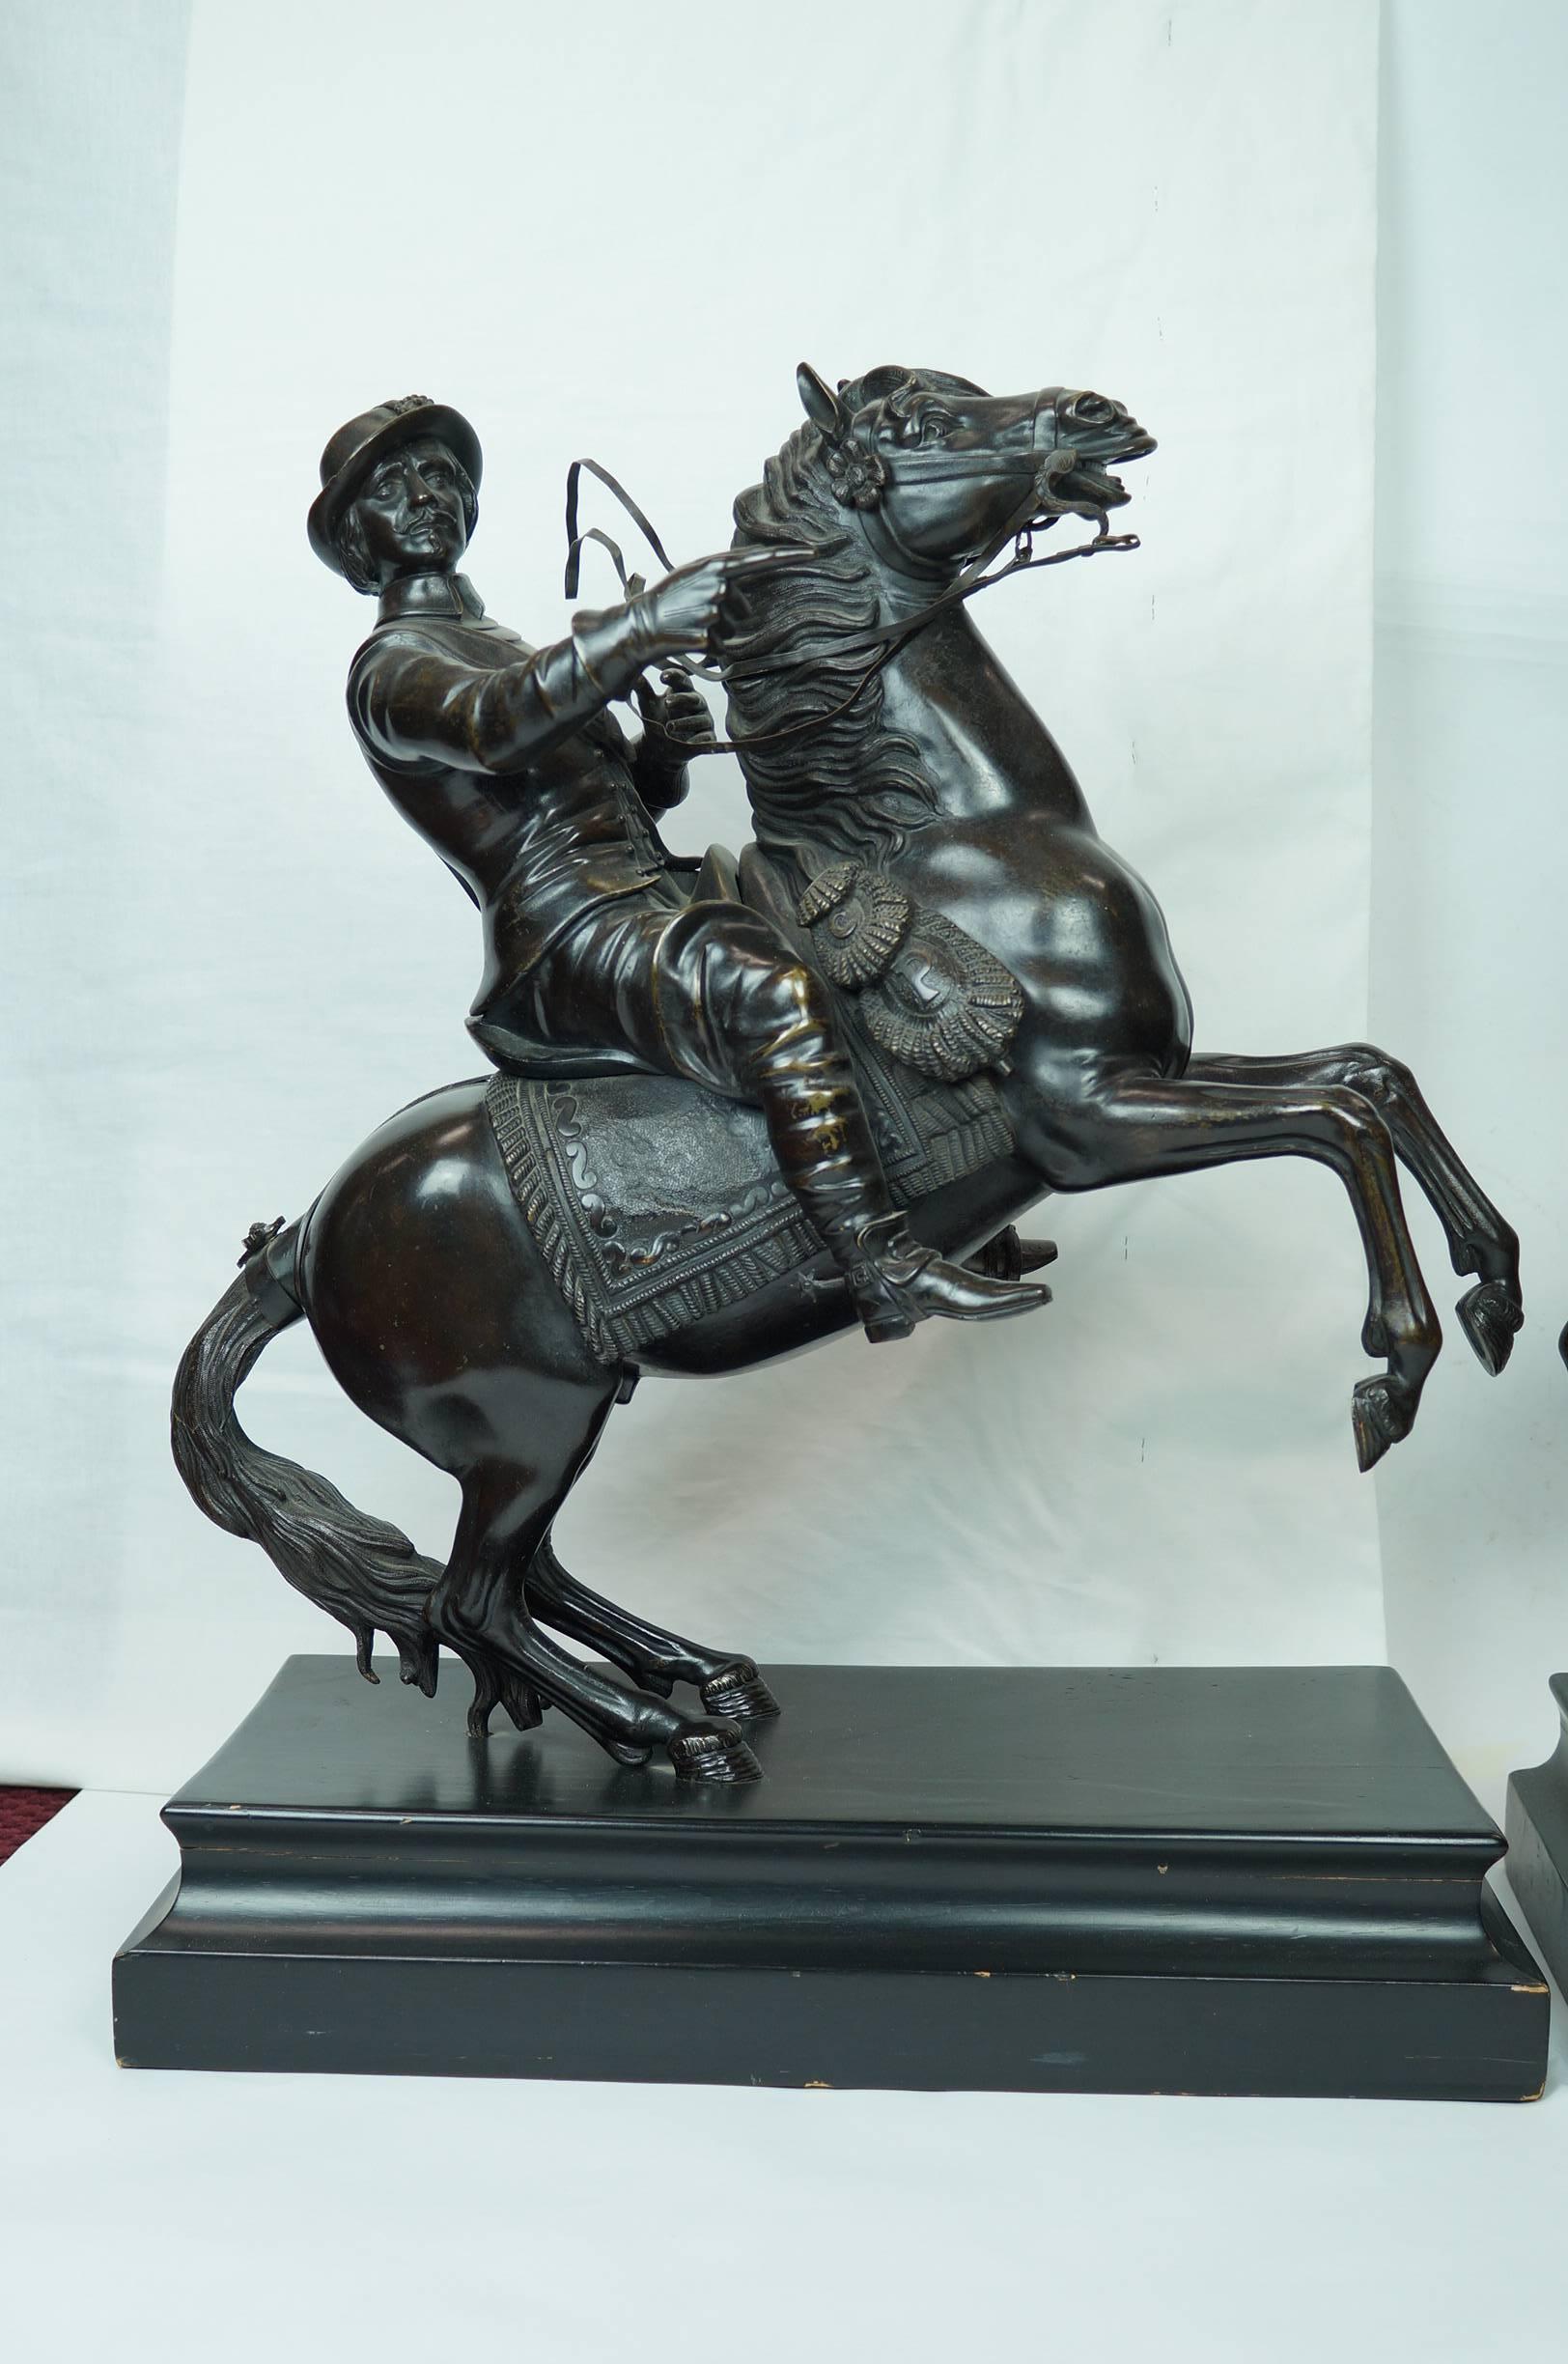 Large pair of patinated bronze figures of warriors on horse with fine quality bronze casting.
Stock Number: SC149